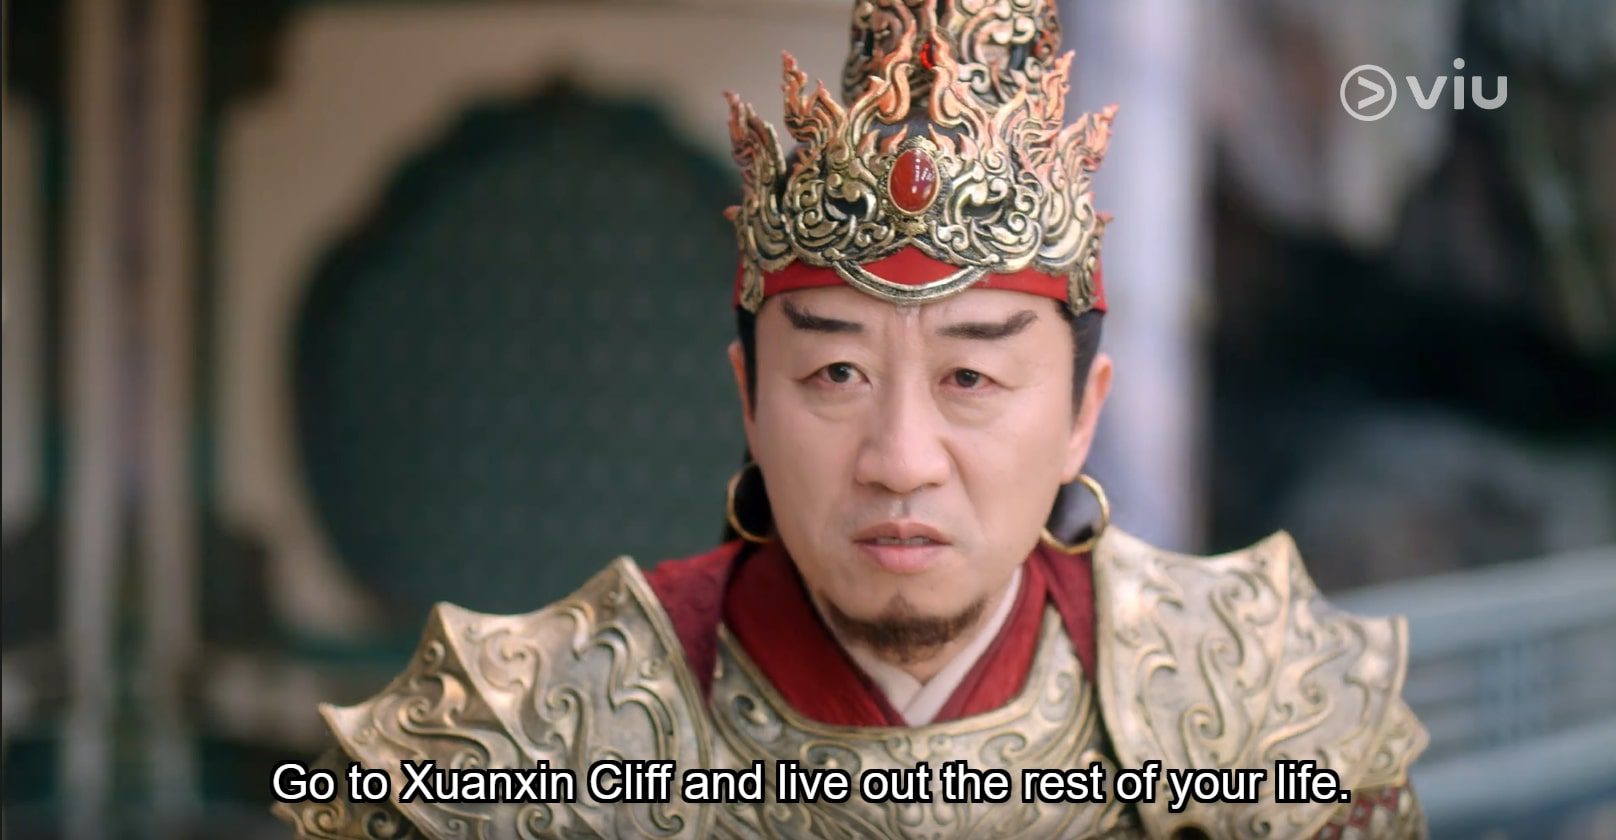 Immortal Samsara ep 8 Huo De appointed as new owner of Xuan Xin Cliff